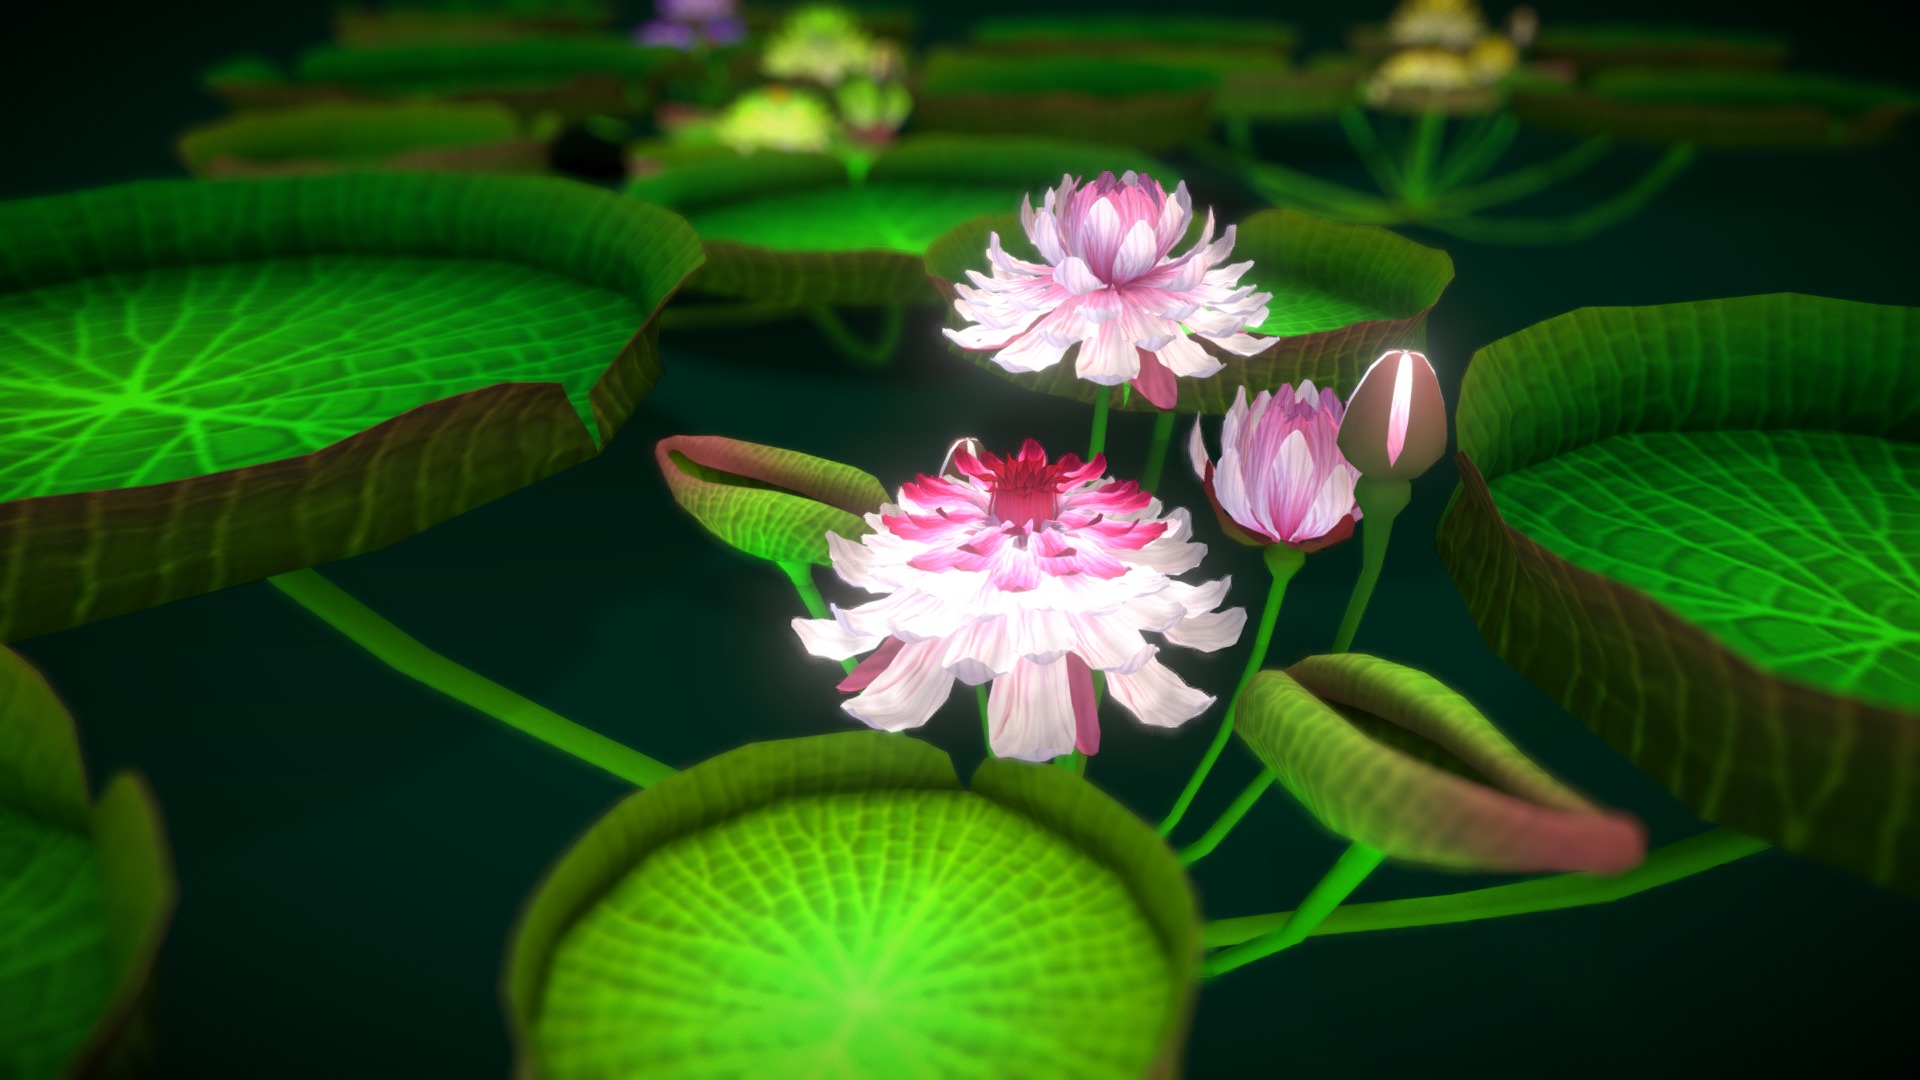 3D model Flower Guyana - This is a 3D model of the Flower Guyana. The 3D model is about a hand holding a pink flower surrounded by lily pads.